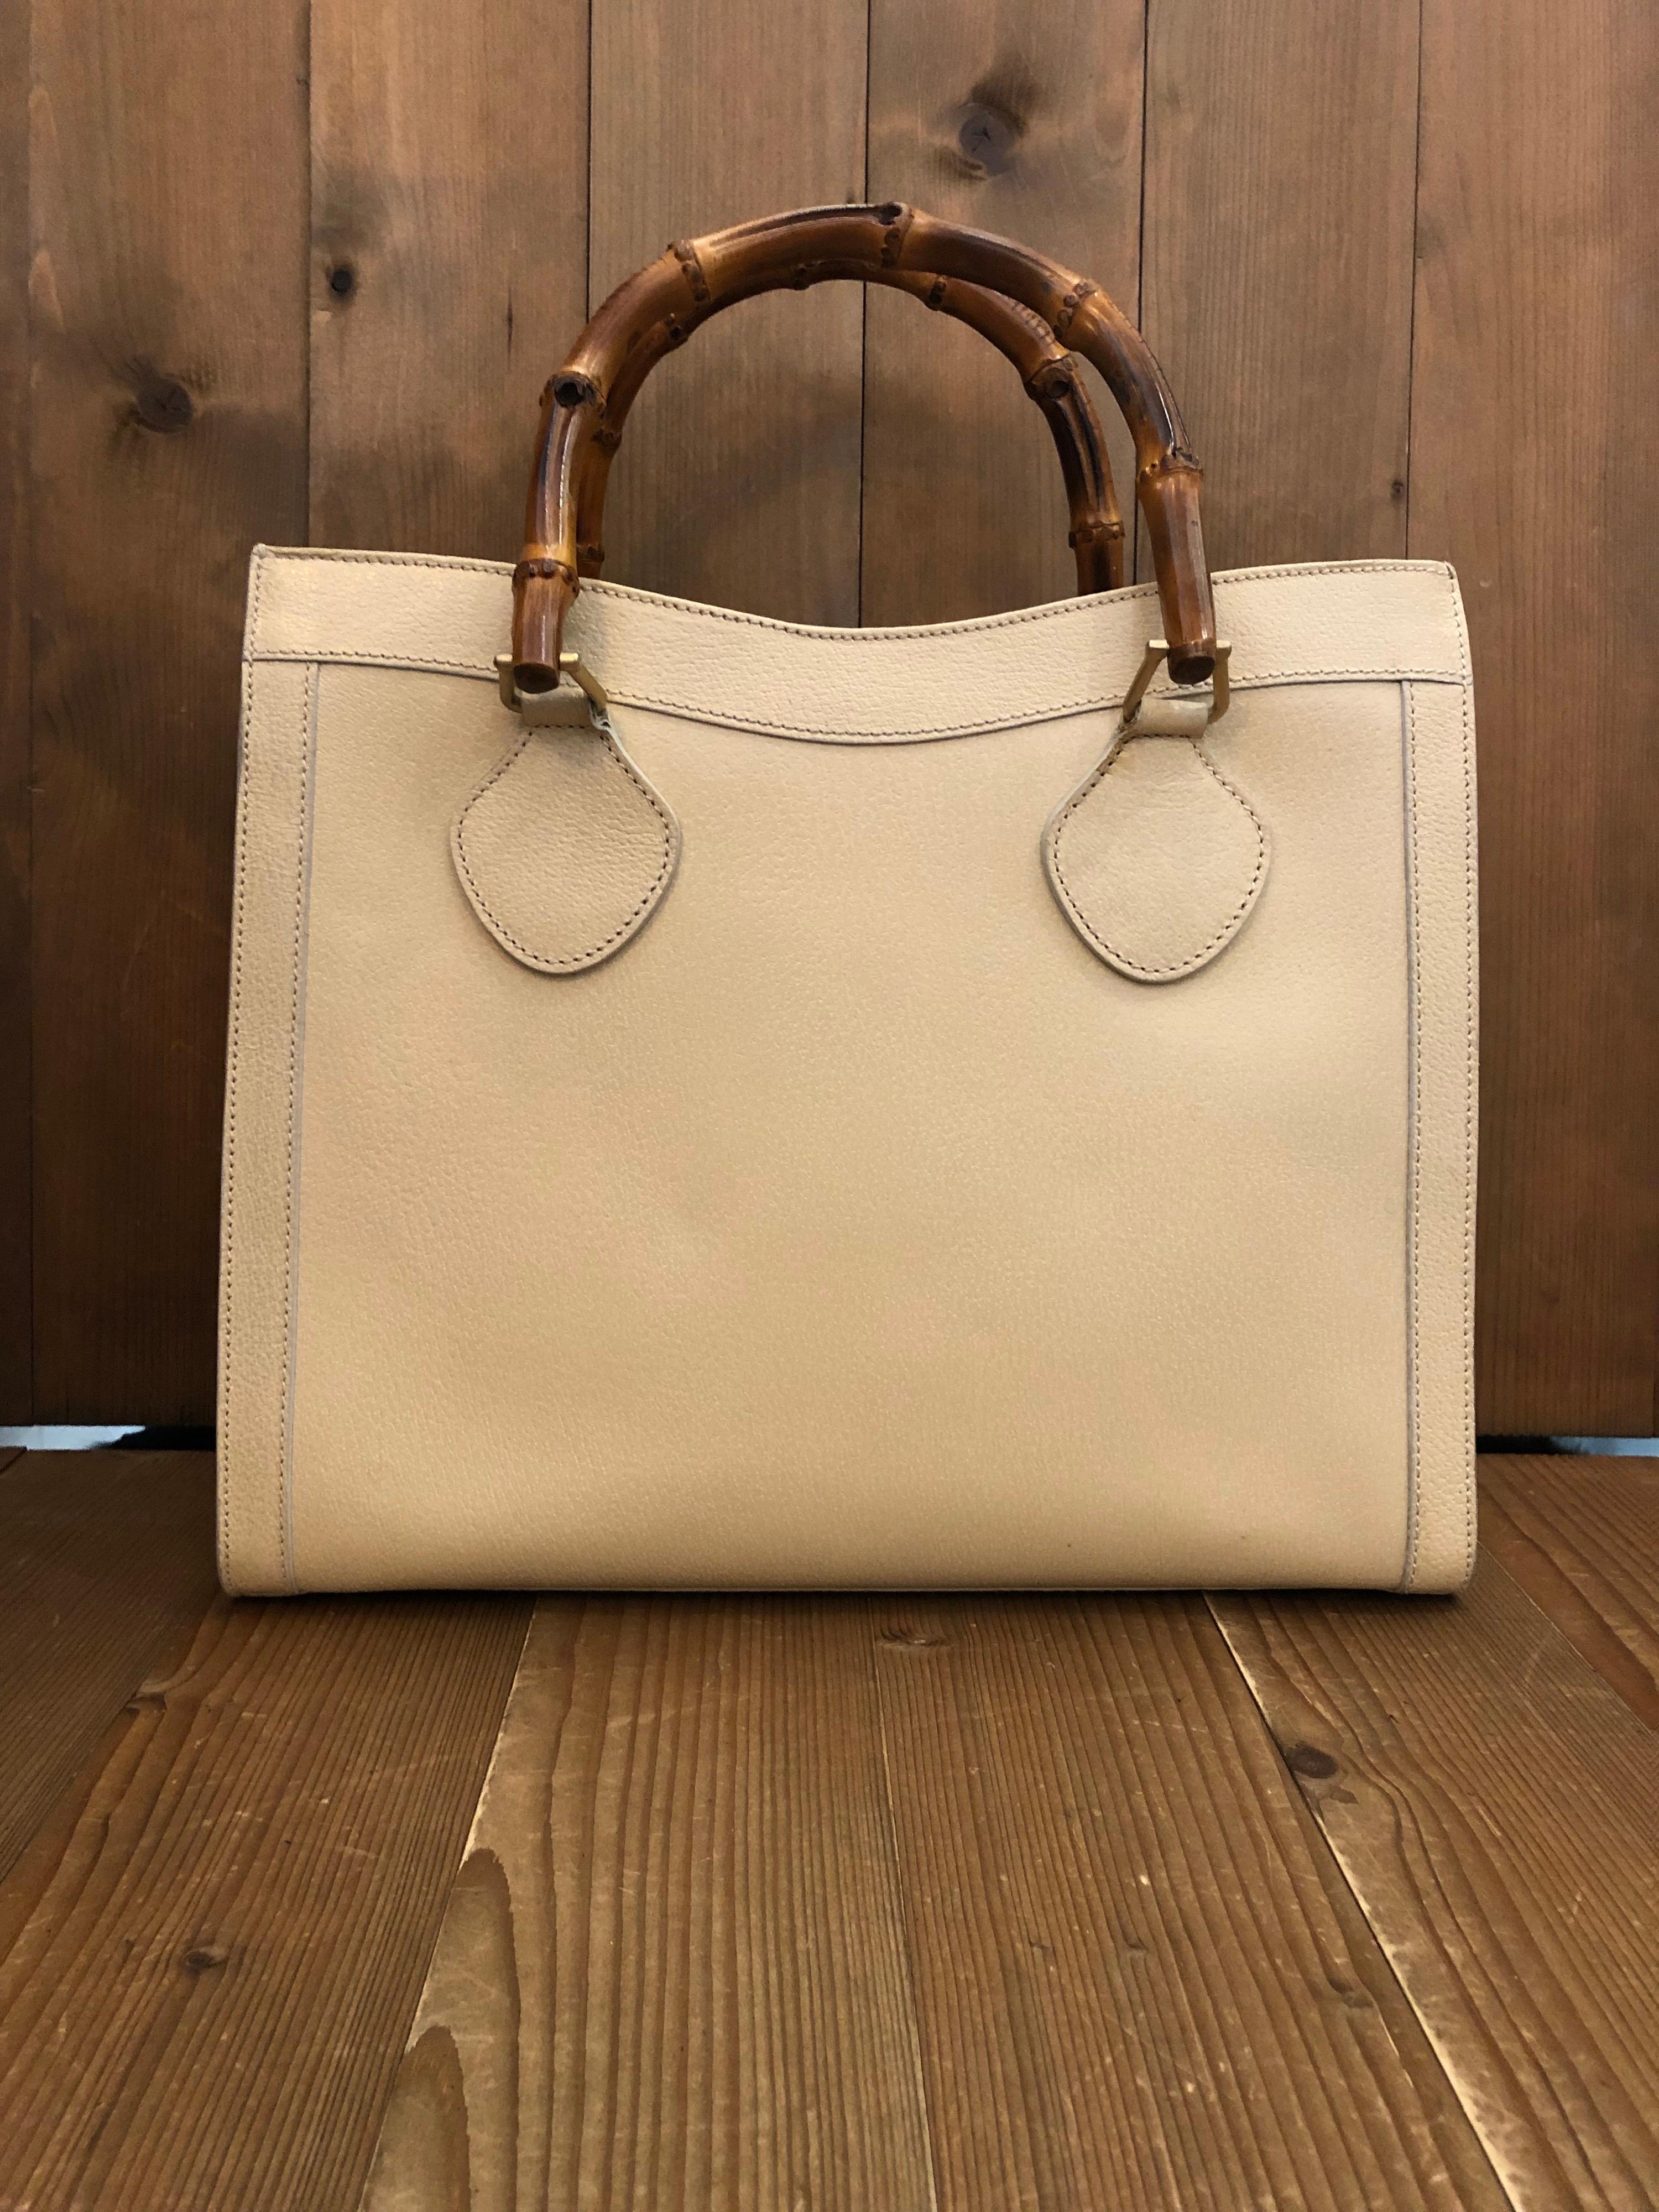 1990s Gucci bamboo tote in beige leather. The Bamboo tote is one of Princess Diana's favorite purses. Gucci revamped this Bamboo tote in 2021 winter collection. Made in Italy. Measures 13 x 11 x 5.5 inches handle drop 5 inches. It features two main